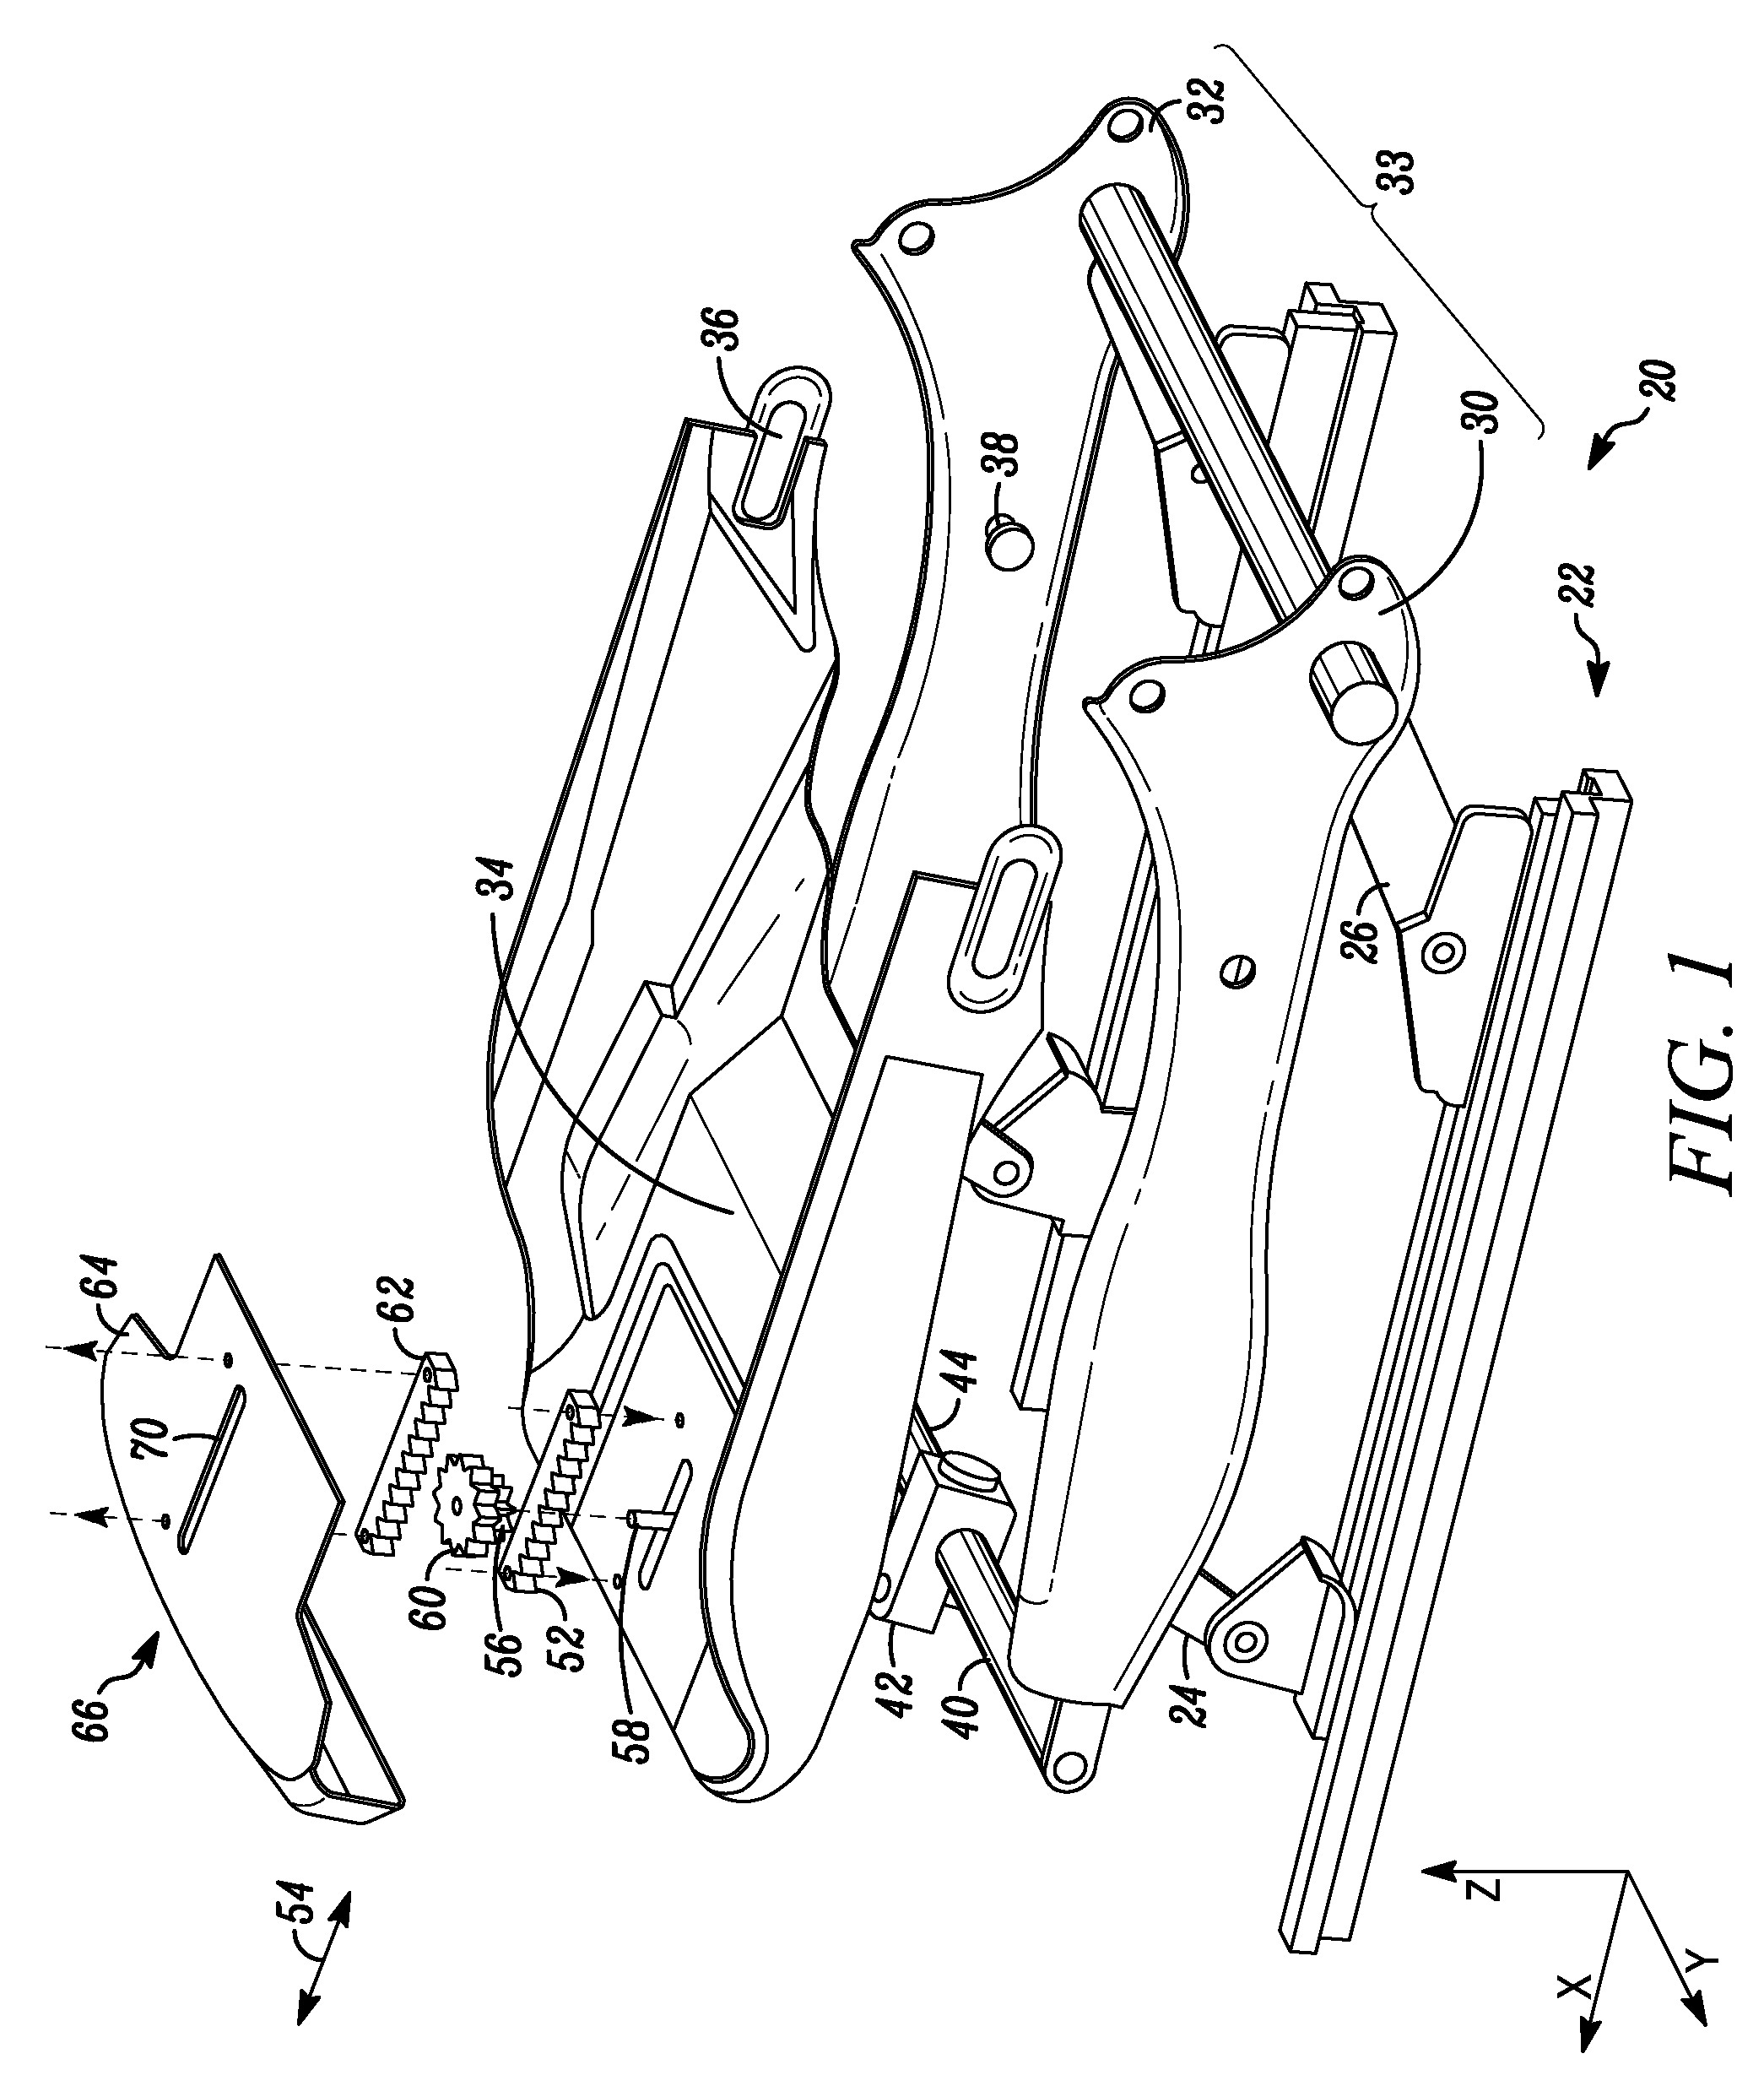 Seat-Depth Adjustable Vehicle Seat with a First Seat Part and a Second Seat Part